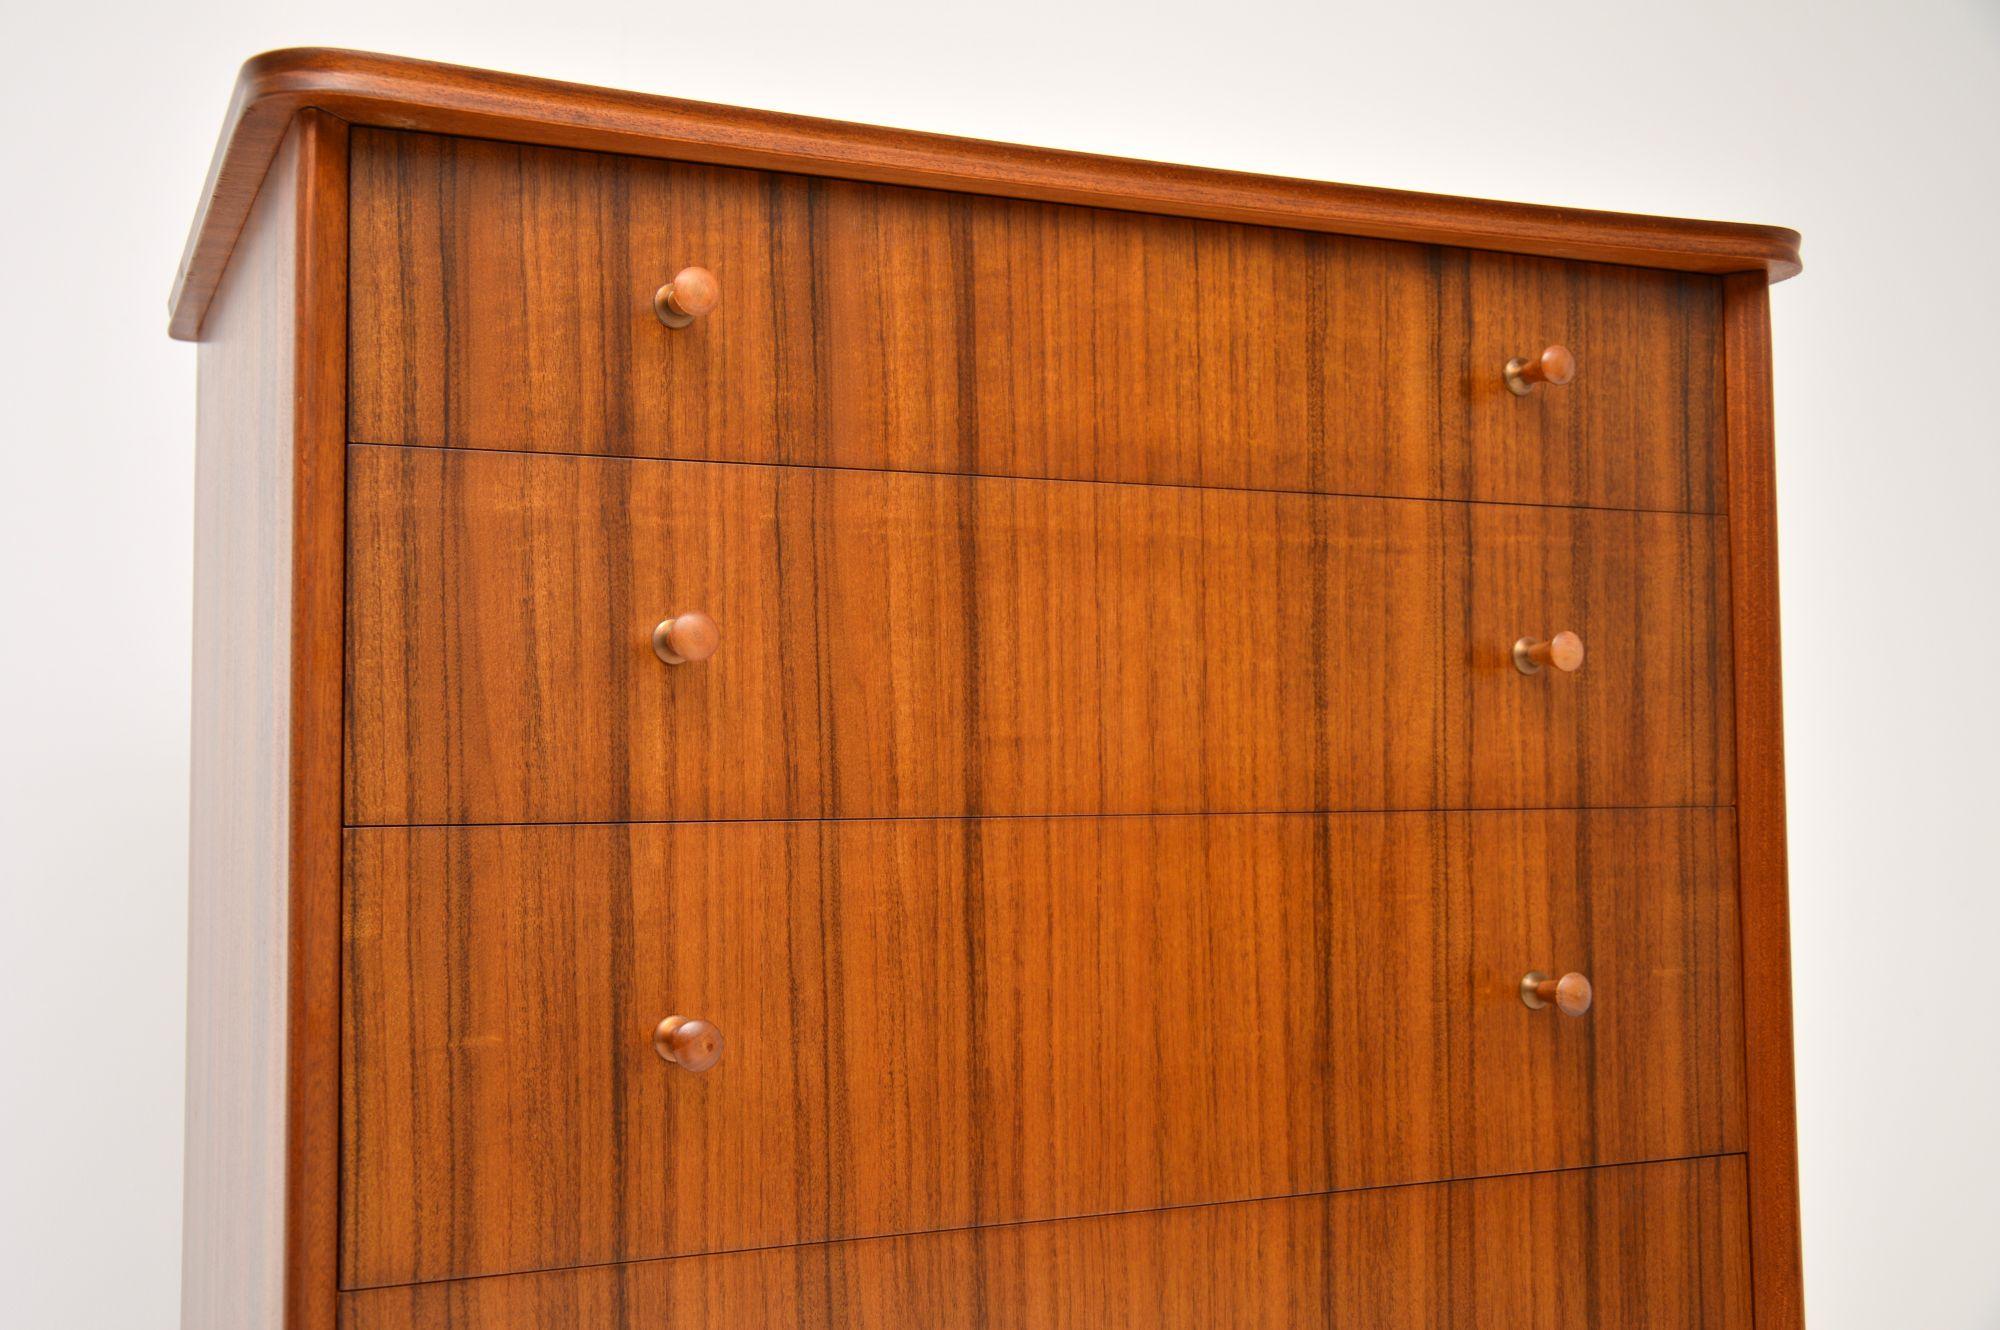 English 1950's Vintage Walnut Chest of Drawers by Peter Hayward for Vanson